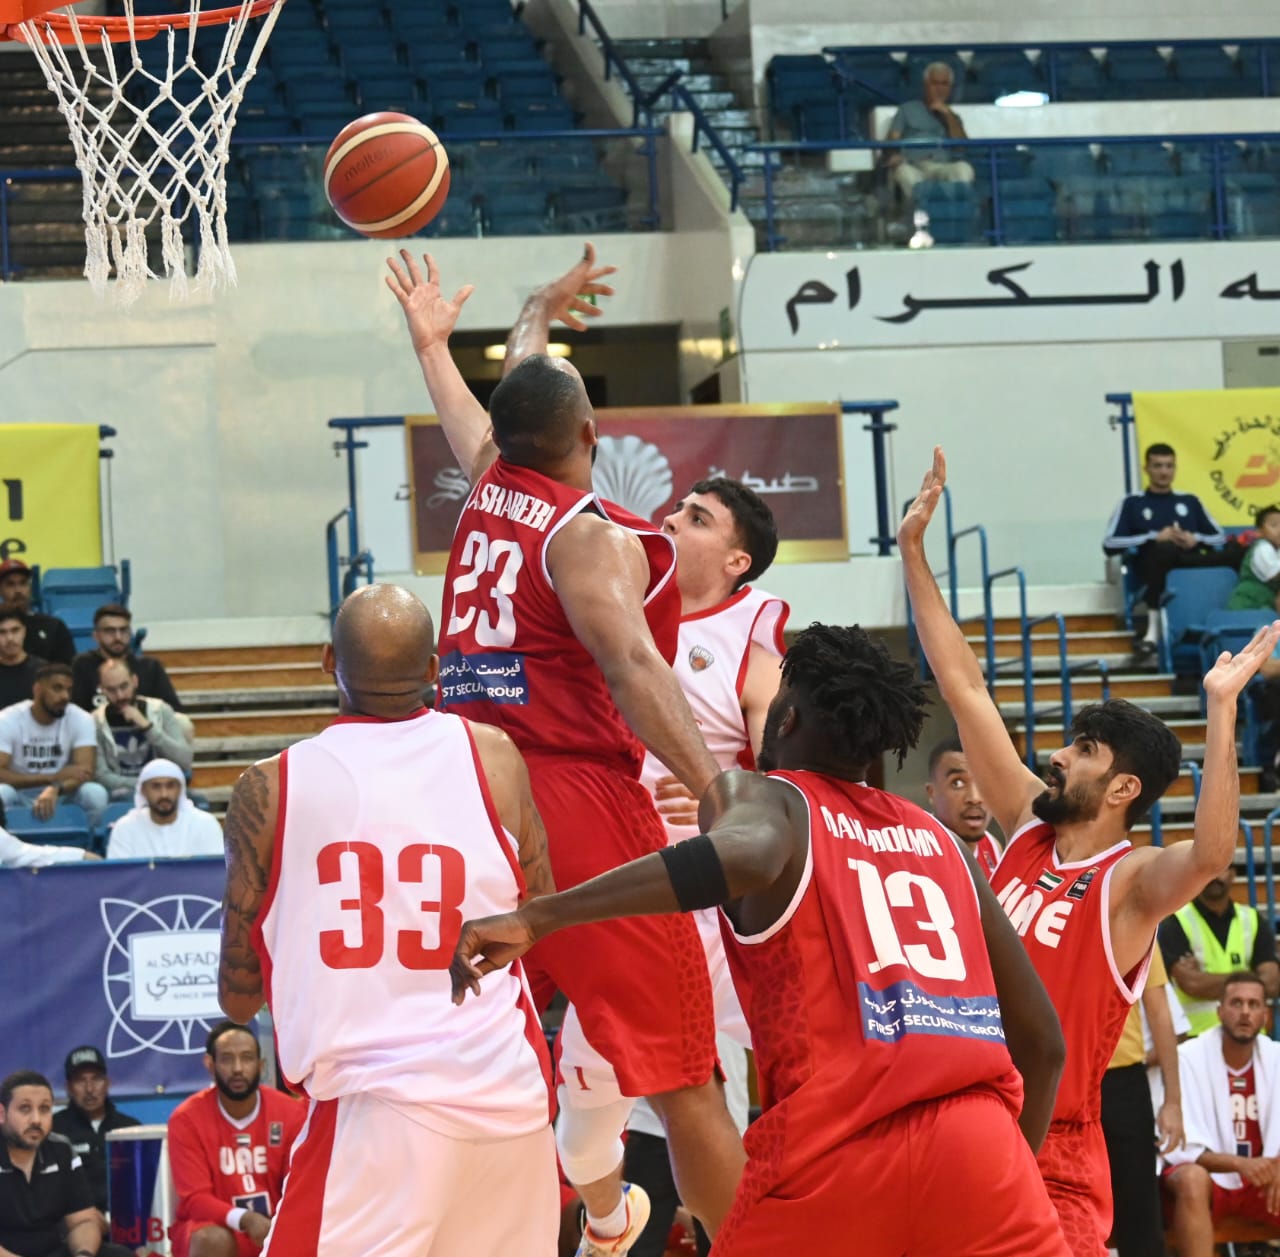 The team bid farewell to the “Dubai International Basketball Association” after losing to Beirut in the quarter-finals